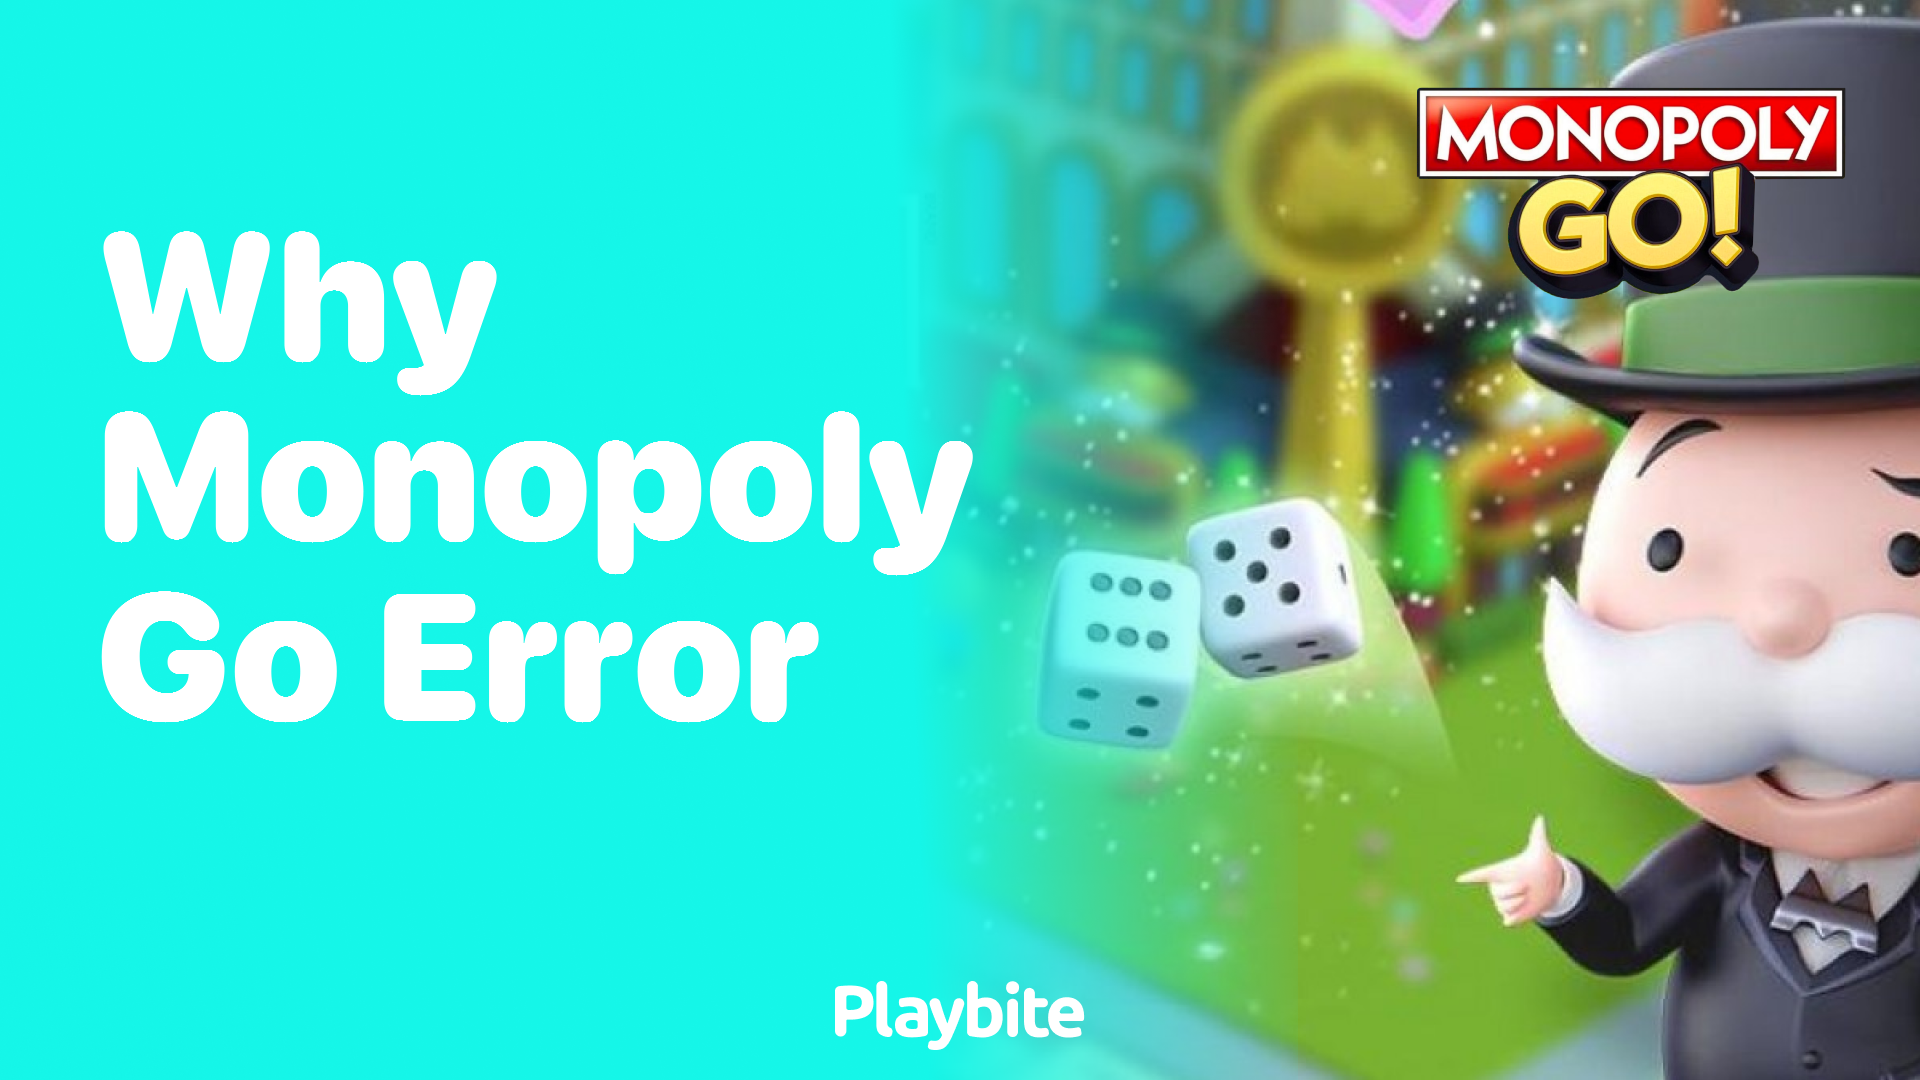 Why Does Monopoly Go Show Errors? Let&#8217;s Find Out!